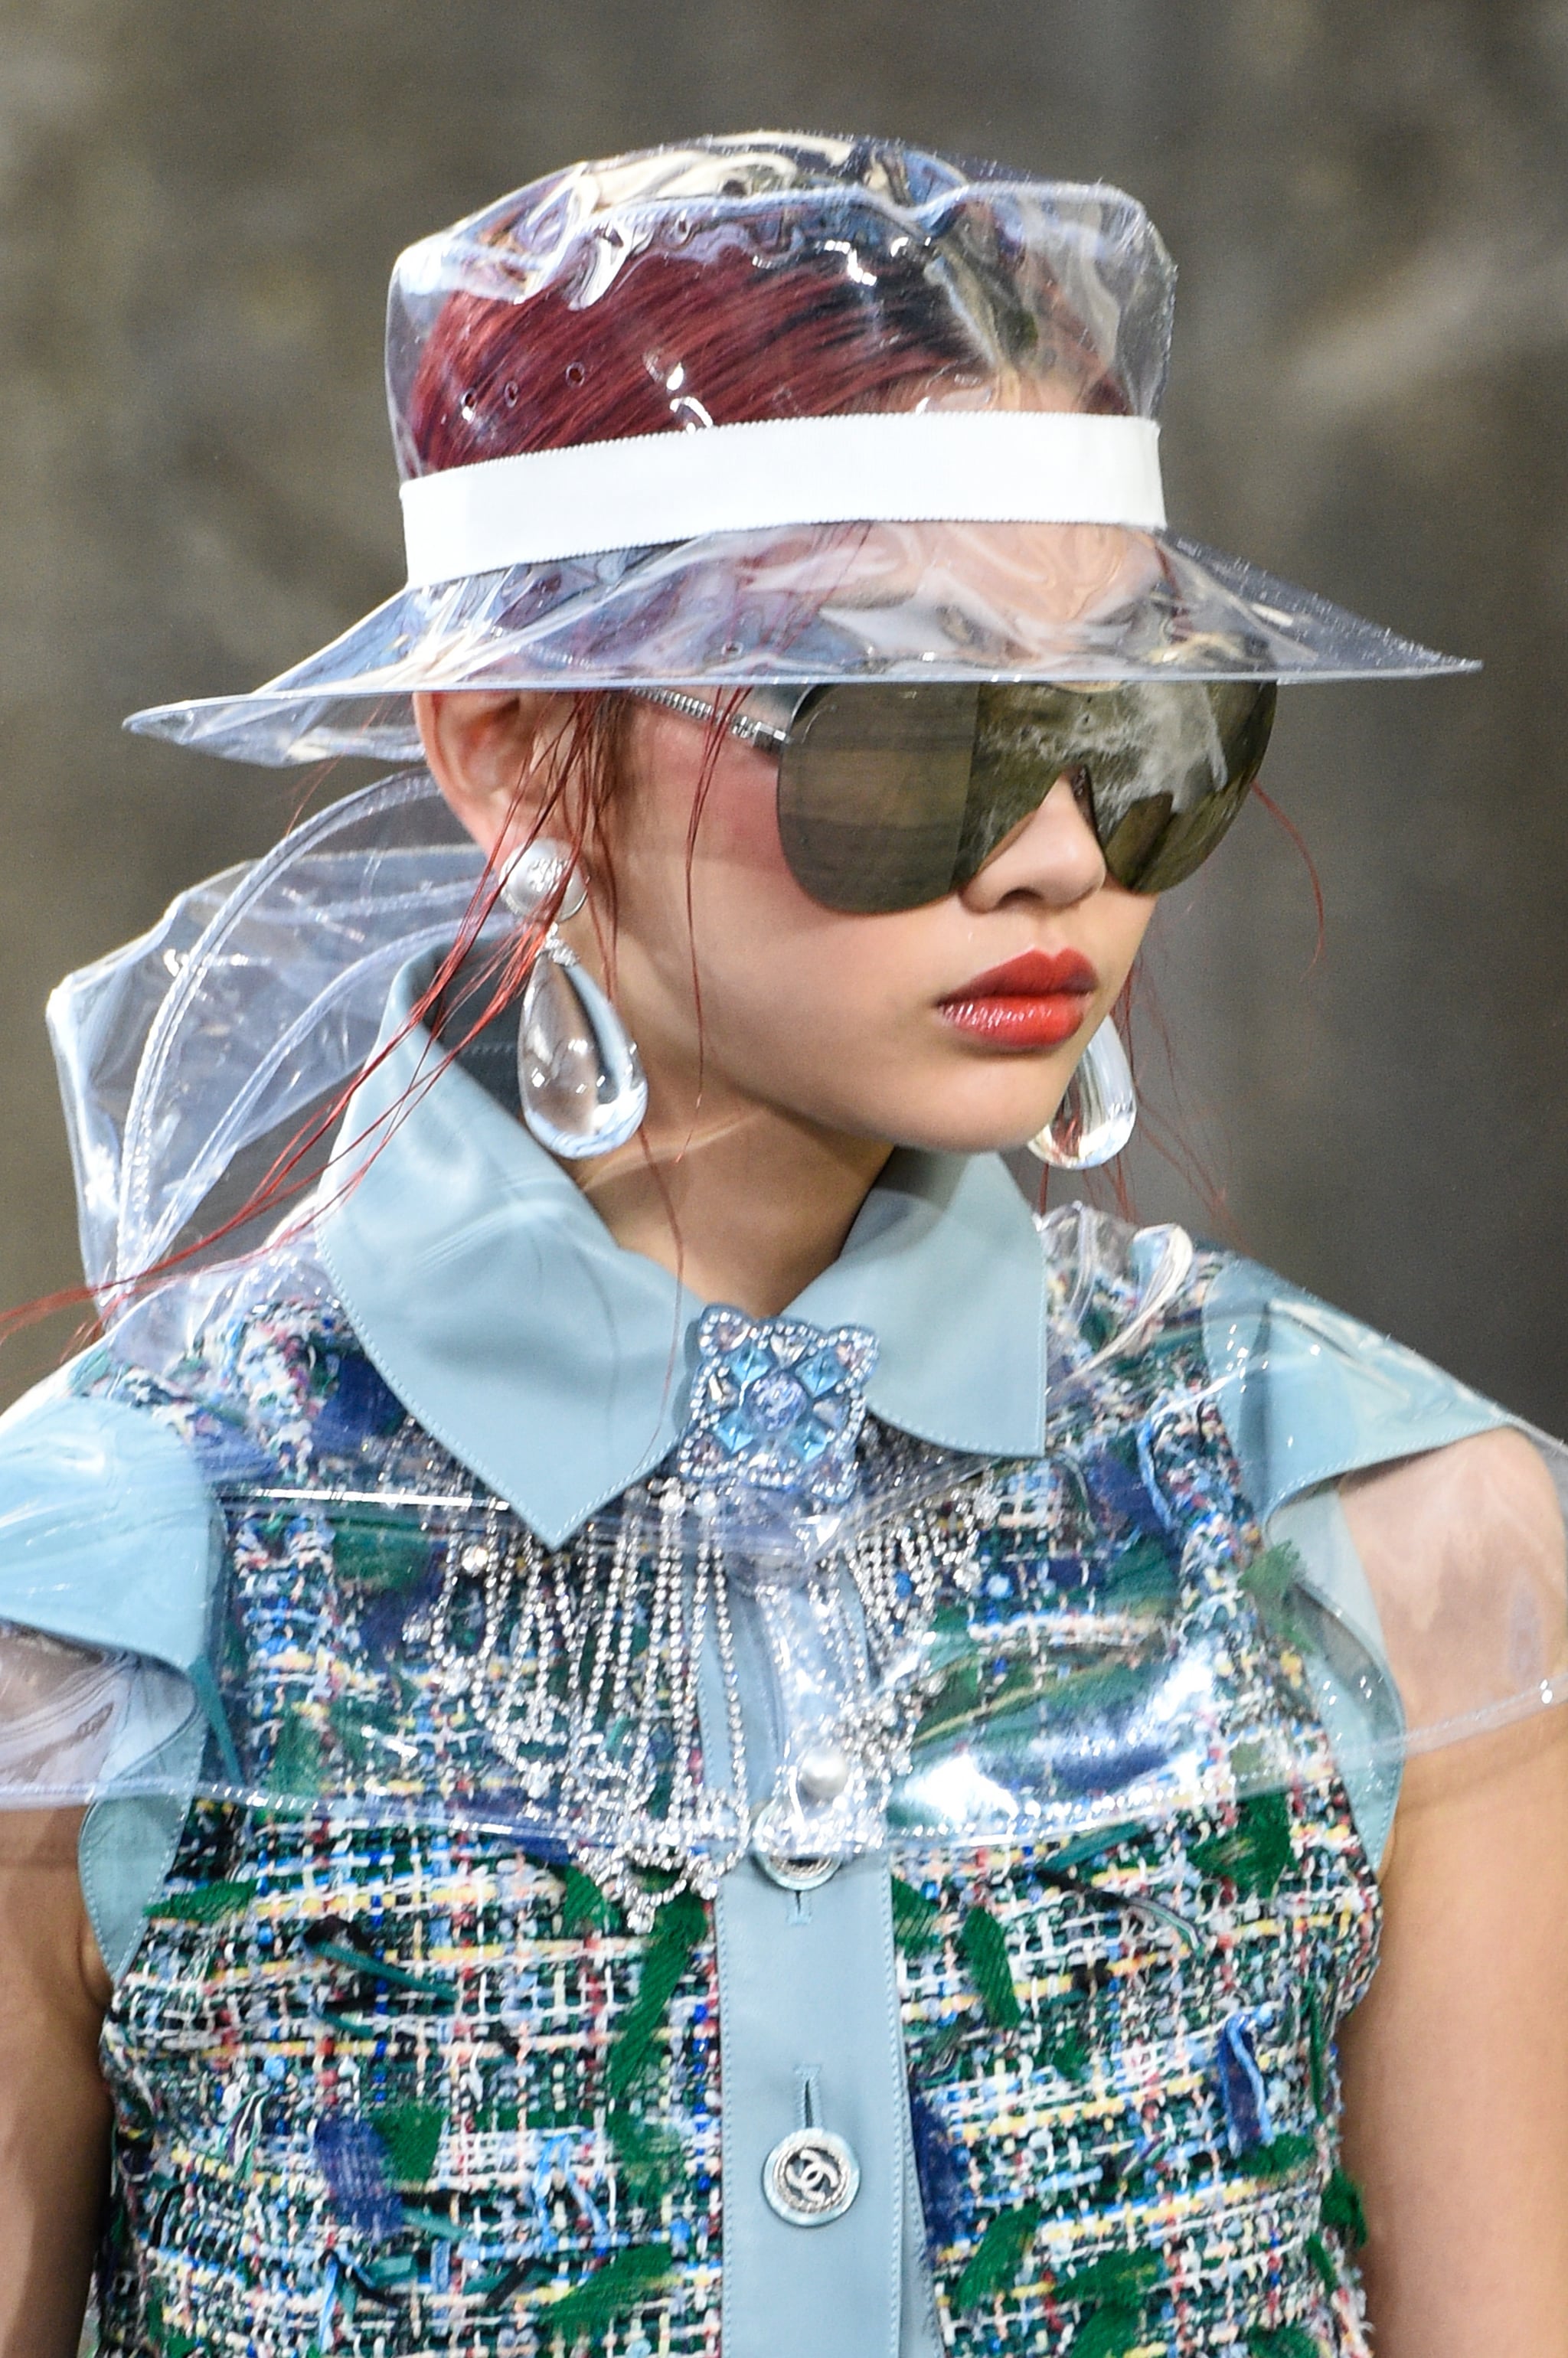 Plastic is fantastic on the Chanel runway